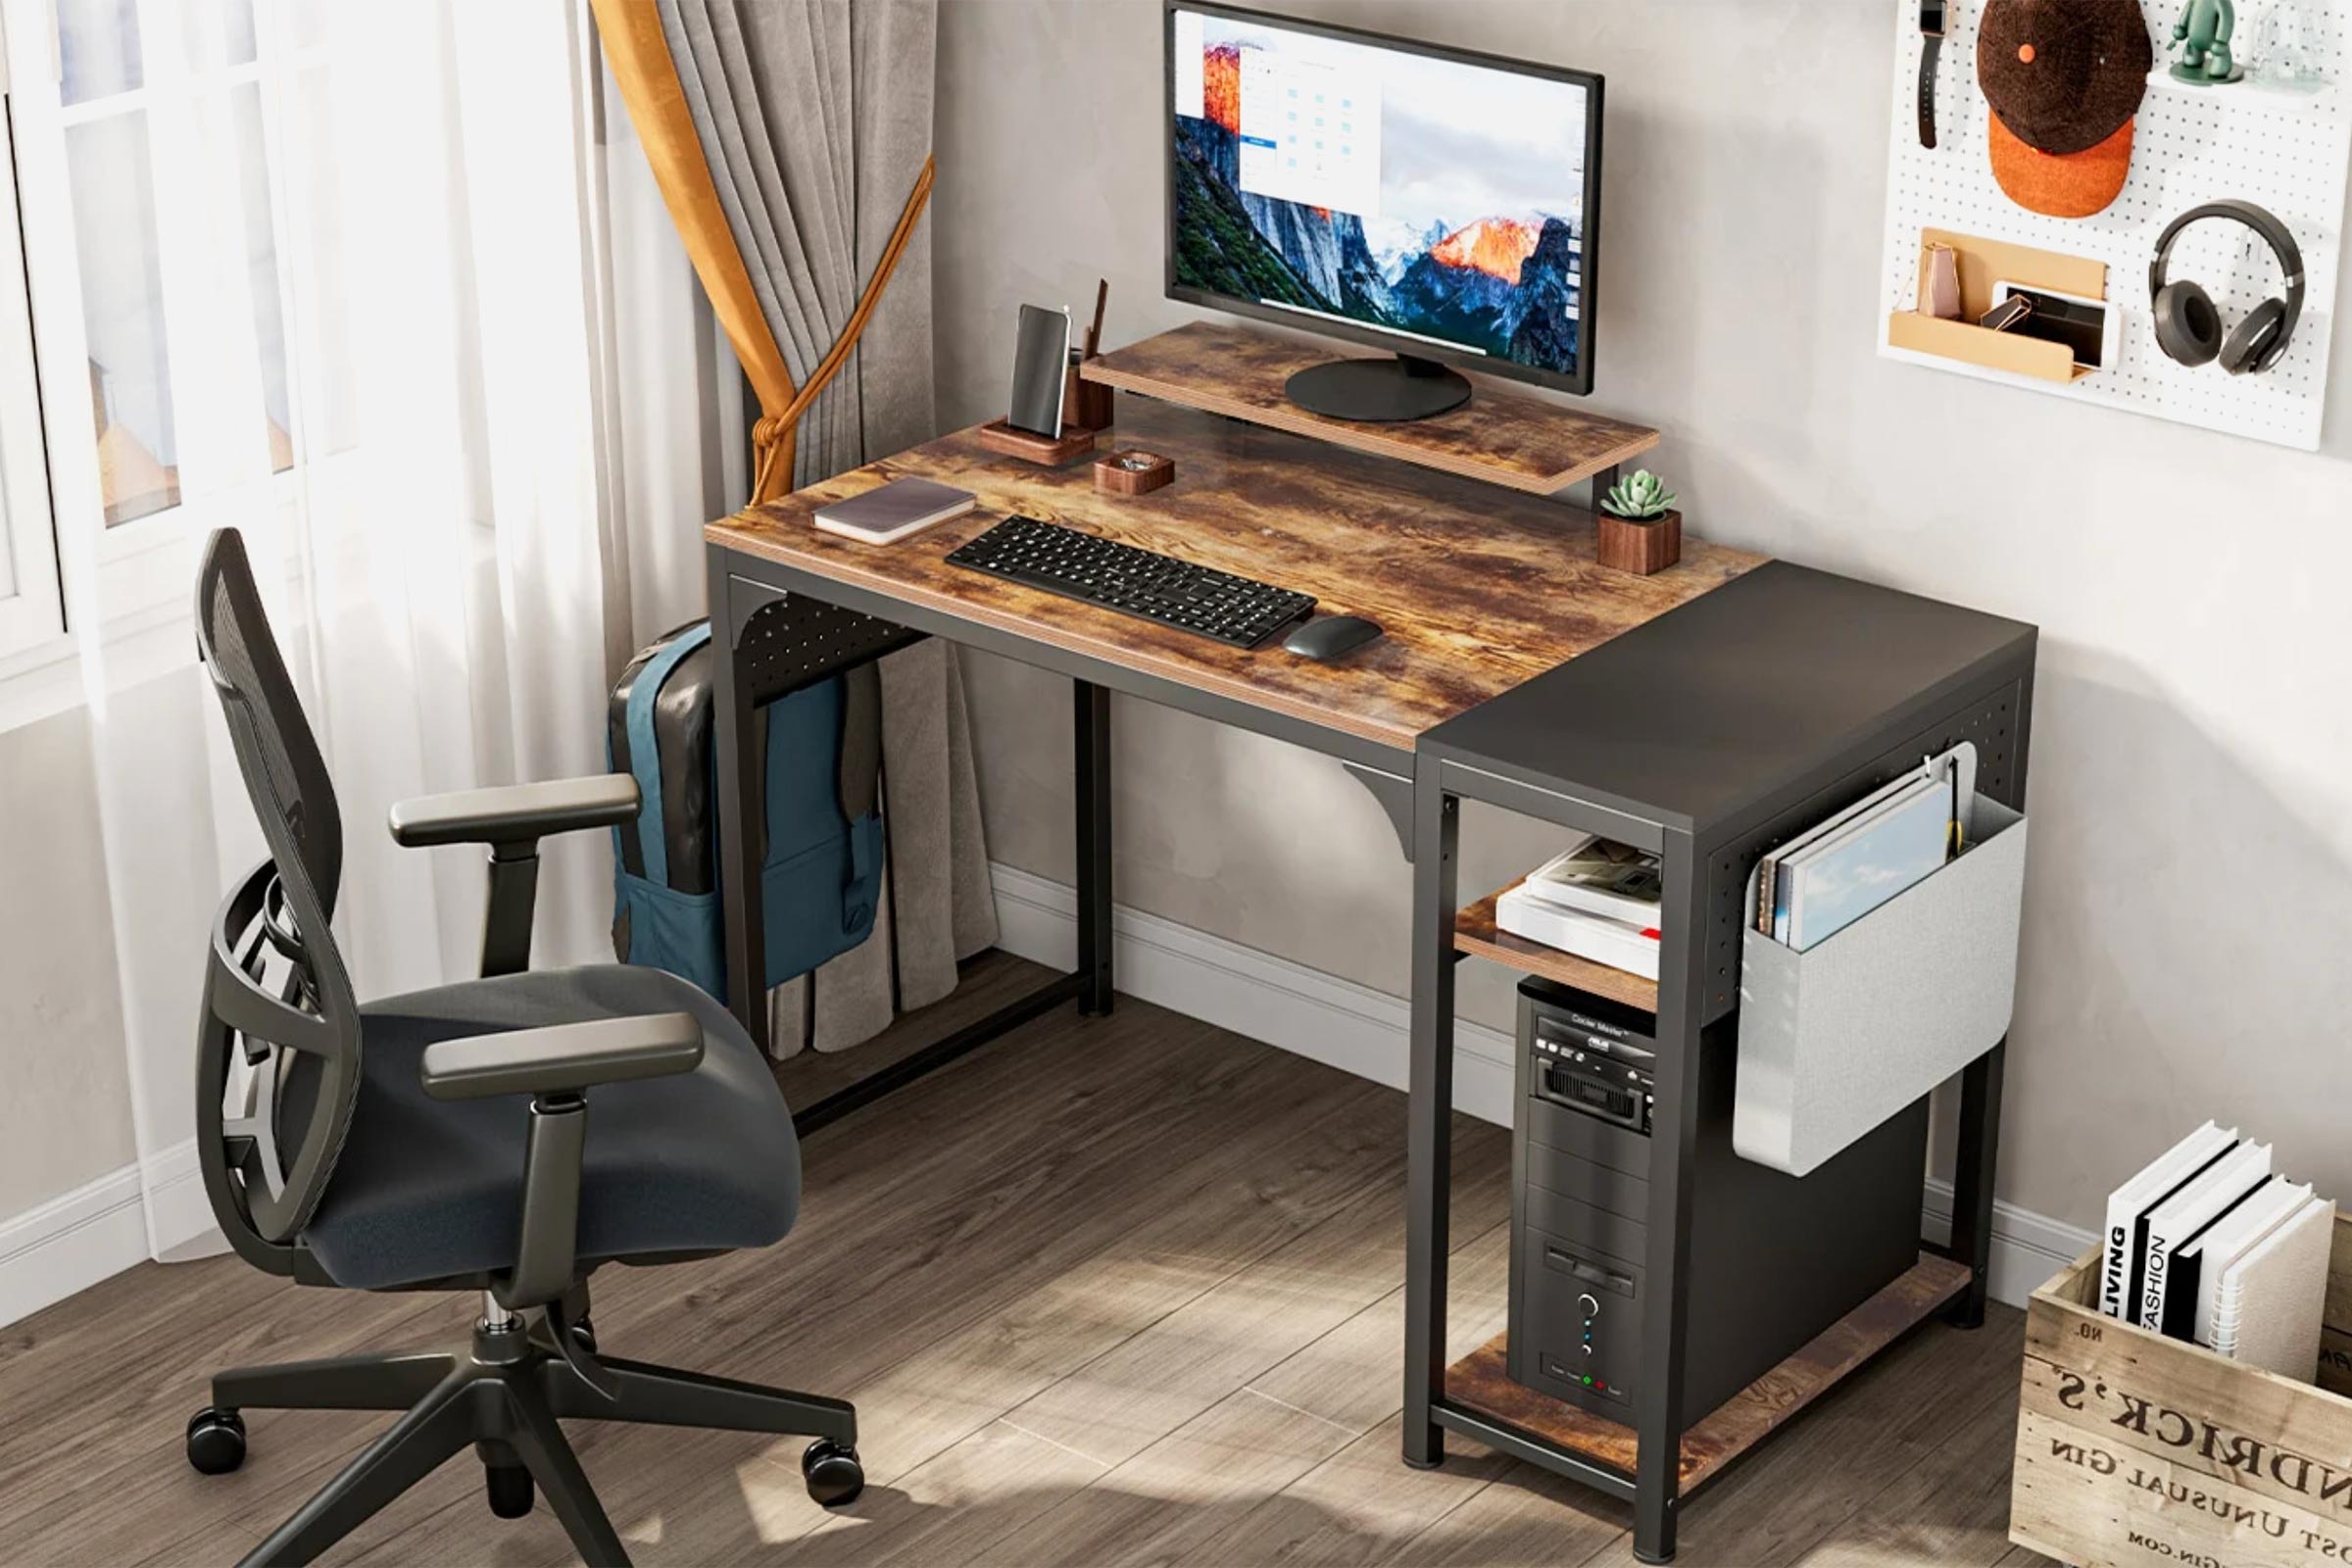 The Essential Products For A Functional & Efficient Home Office